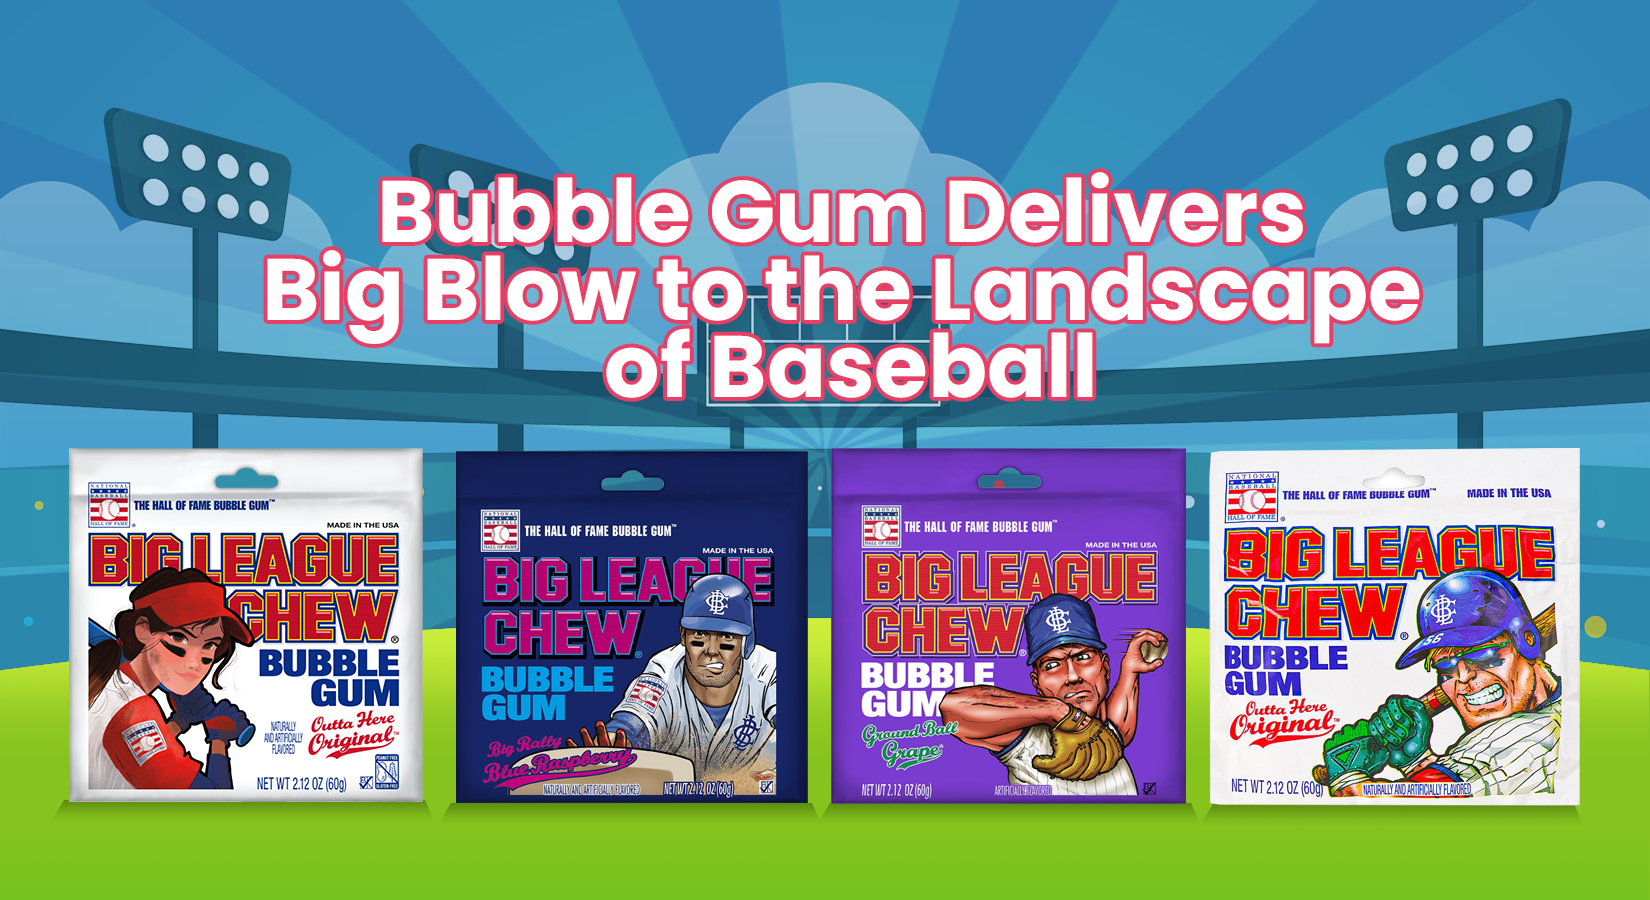 Bubble Gum Delivers Big Blow to the Landscape of Baseball